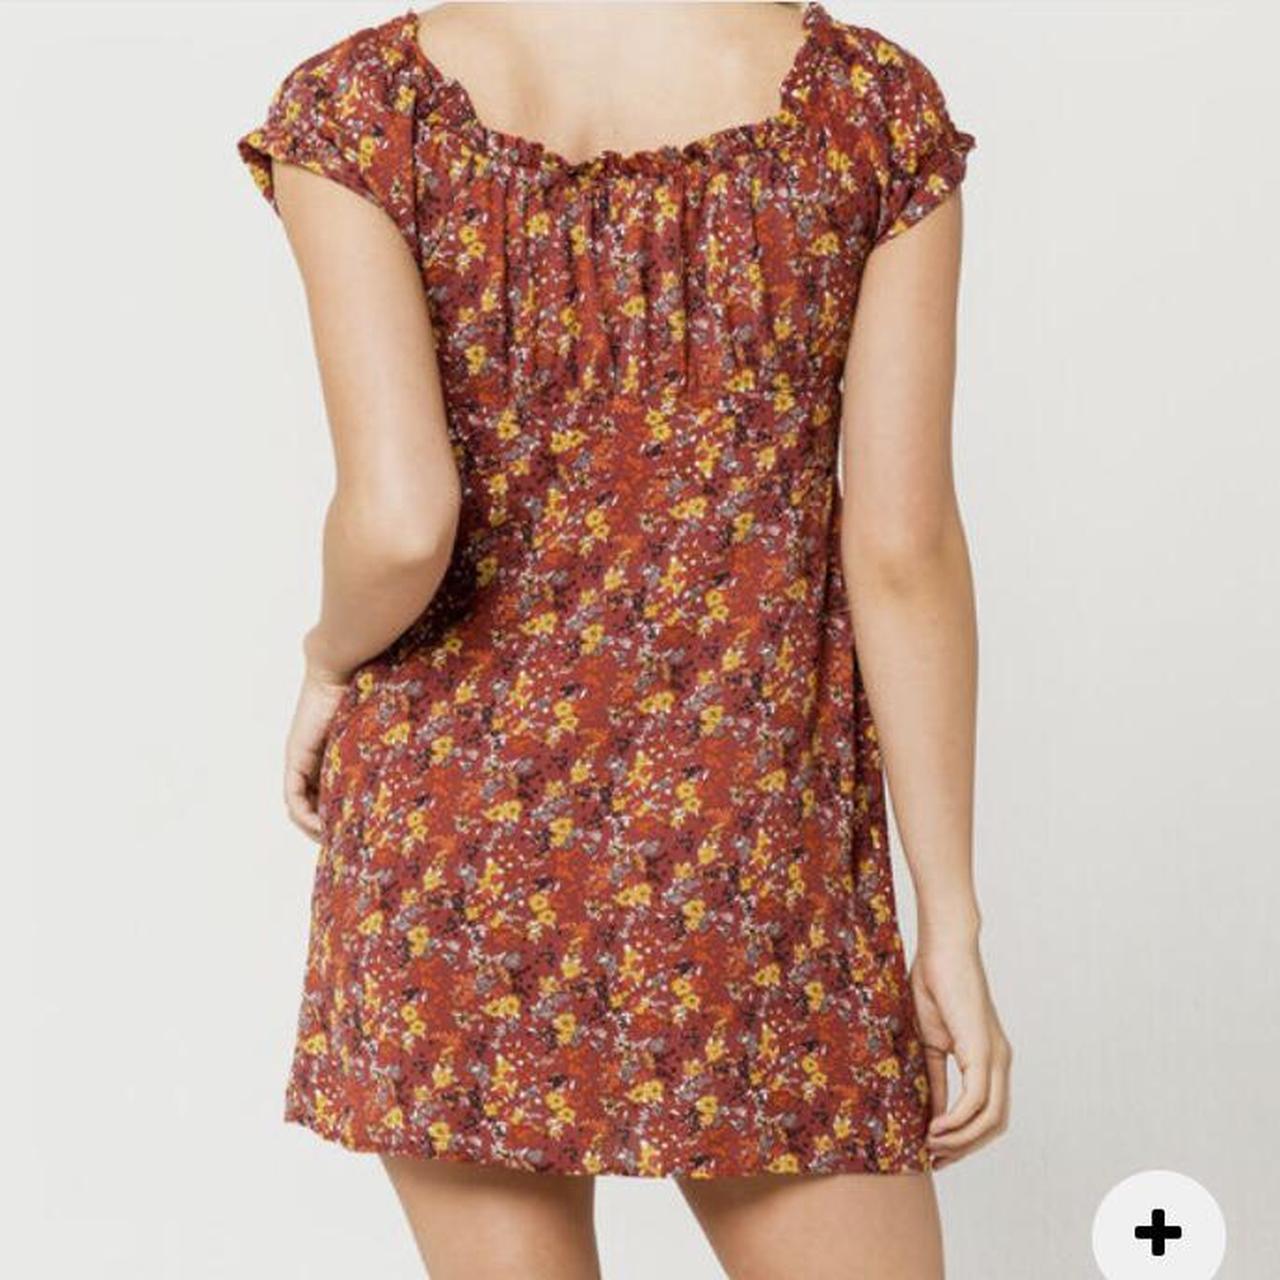 Product Image 4 - Fall floral dress 🤎 
Size: